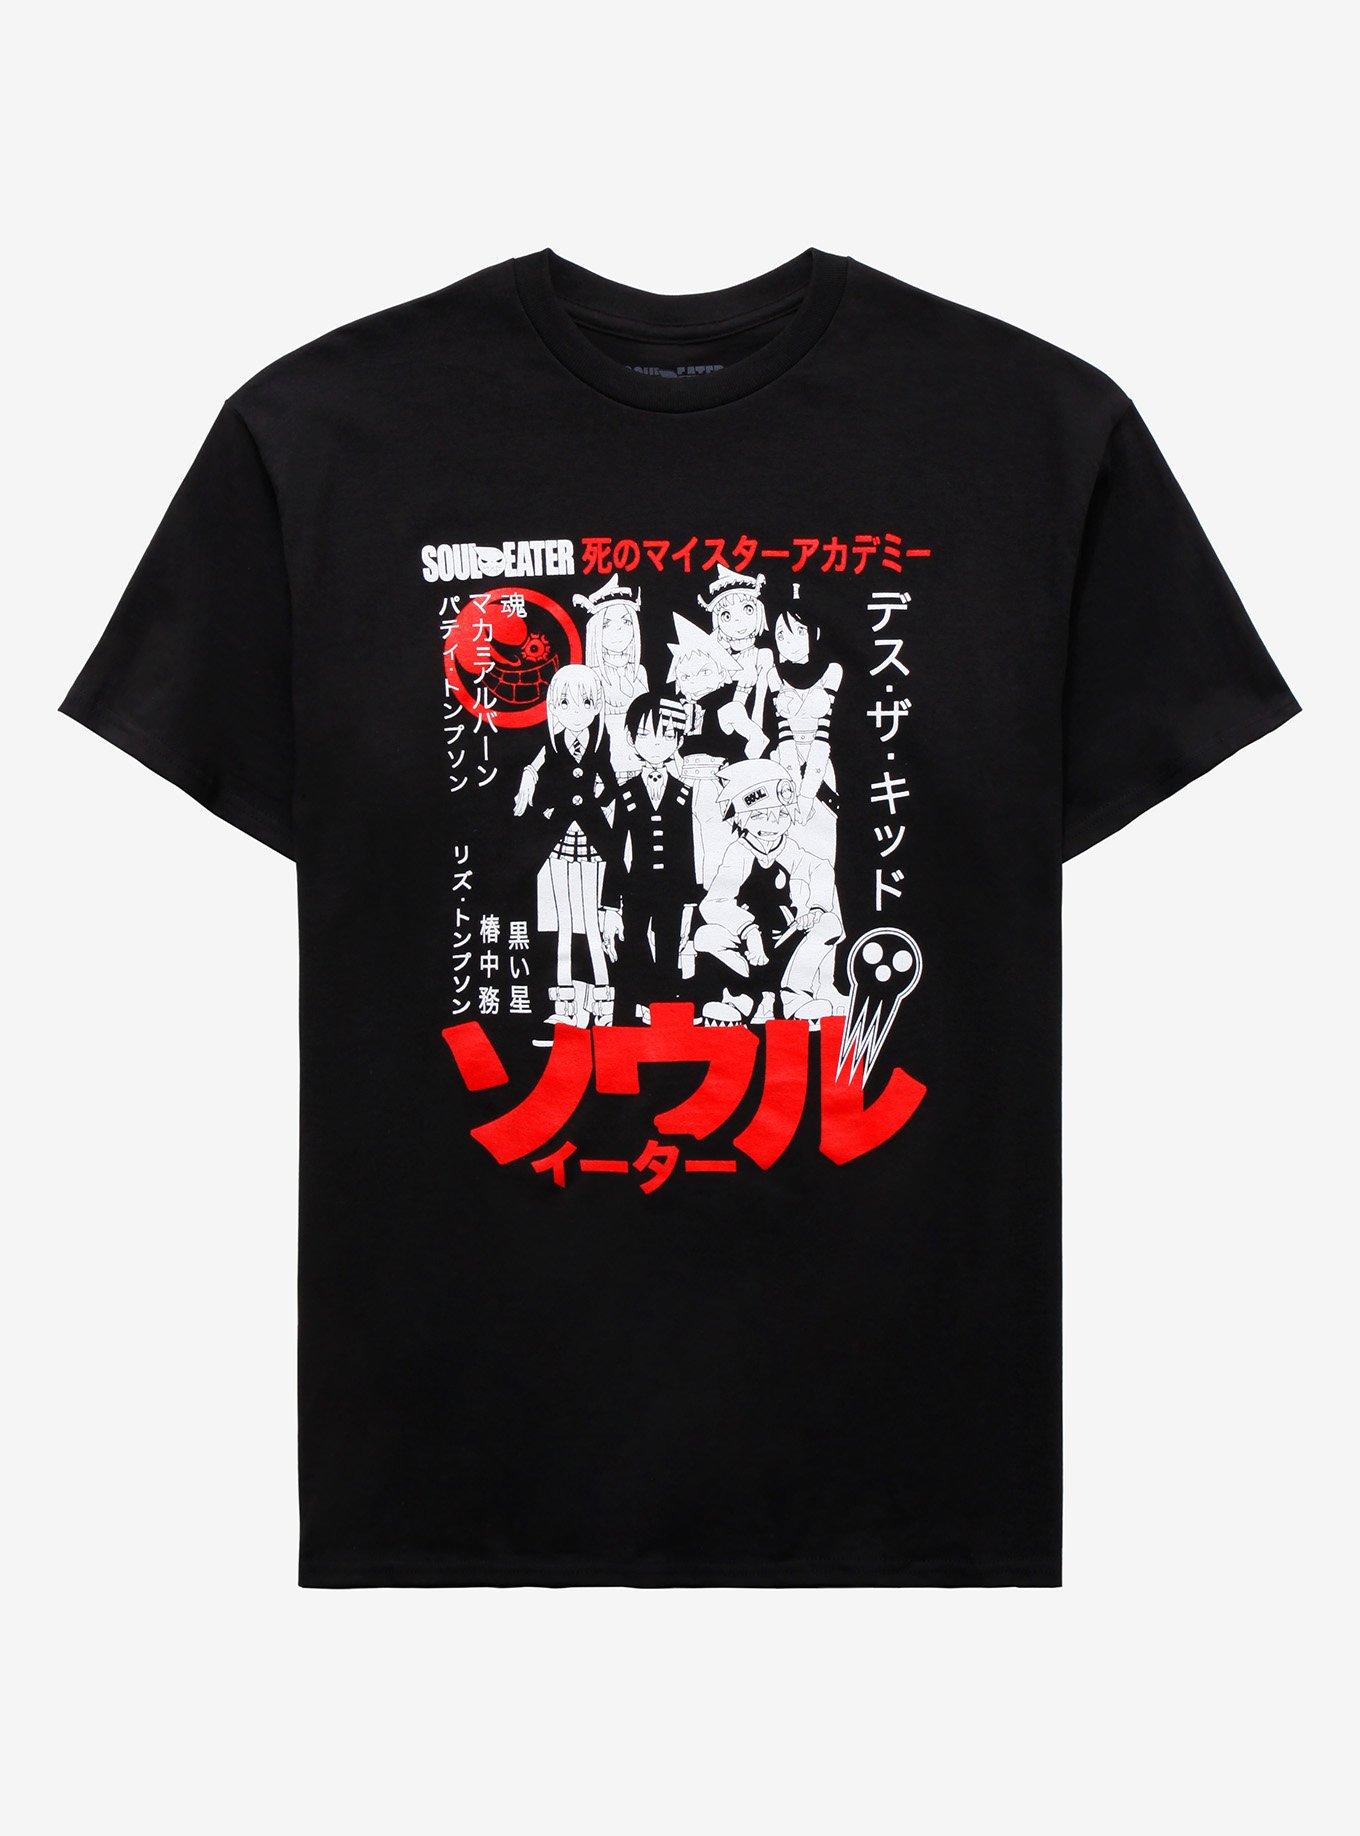 Soul Eater Black White & Red Group T-Shirt | Hot Topic